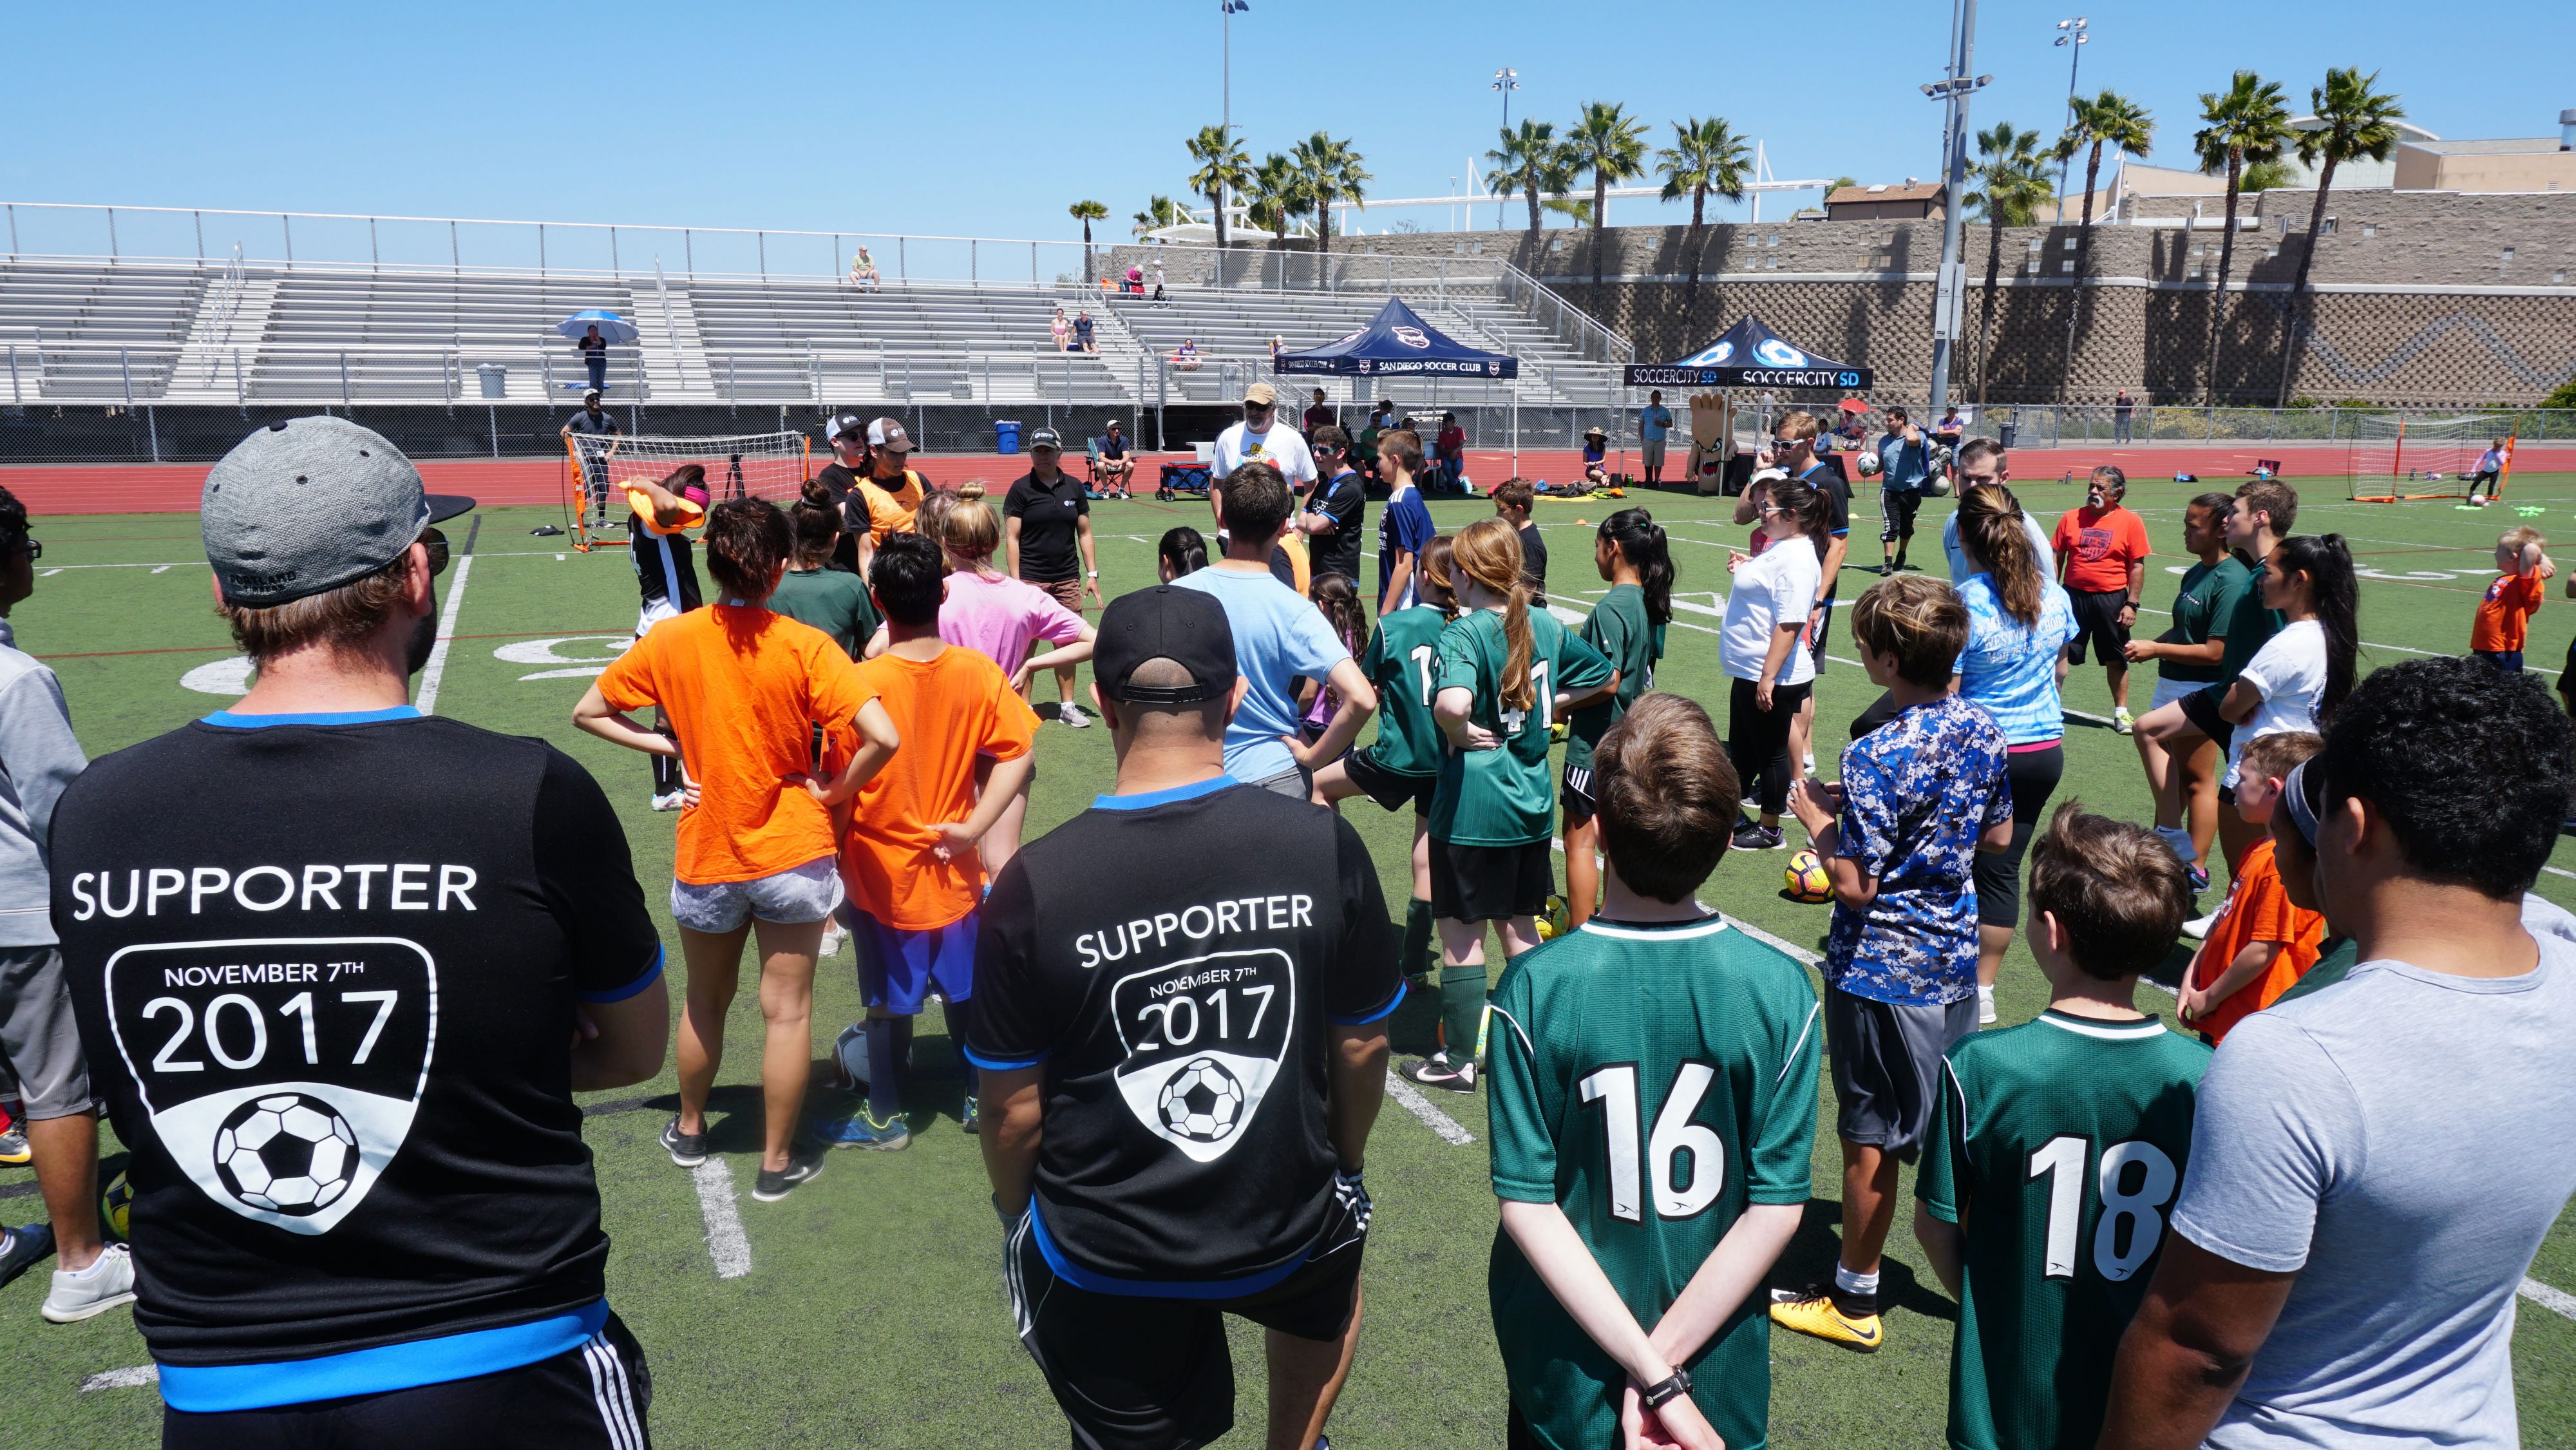 Second Annual TOPSoccer Festival Kicks Off June 2nd